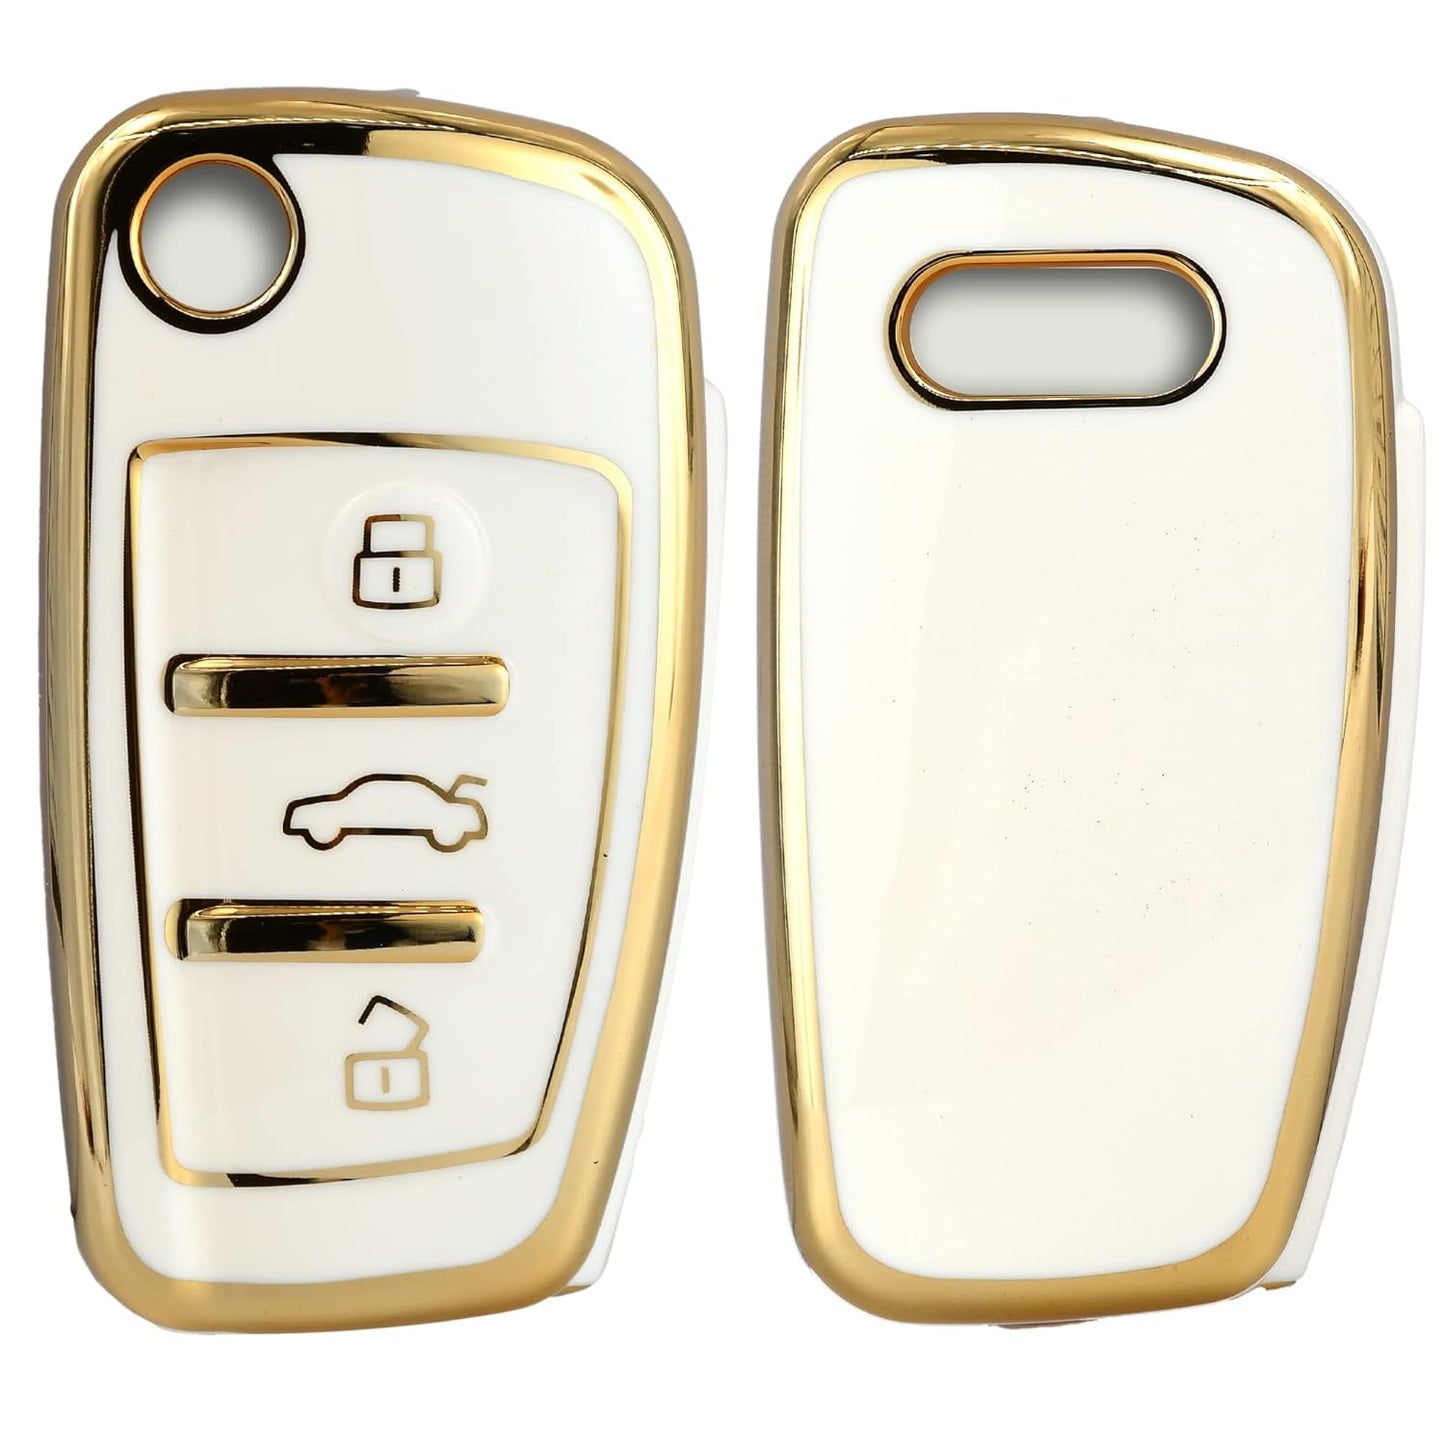 
                  
                    KMH TPU Gold Car Key Cover Compatible with Audi A1 A3 A6 Q2 Q3 Q7 TT TTS R8 S3 S6 RS3 Smart Key Cover (Pack of 2, White-Red)-TPU GOLD KEY COVER-KMH-CARPLUS
                  
                